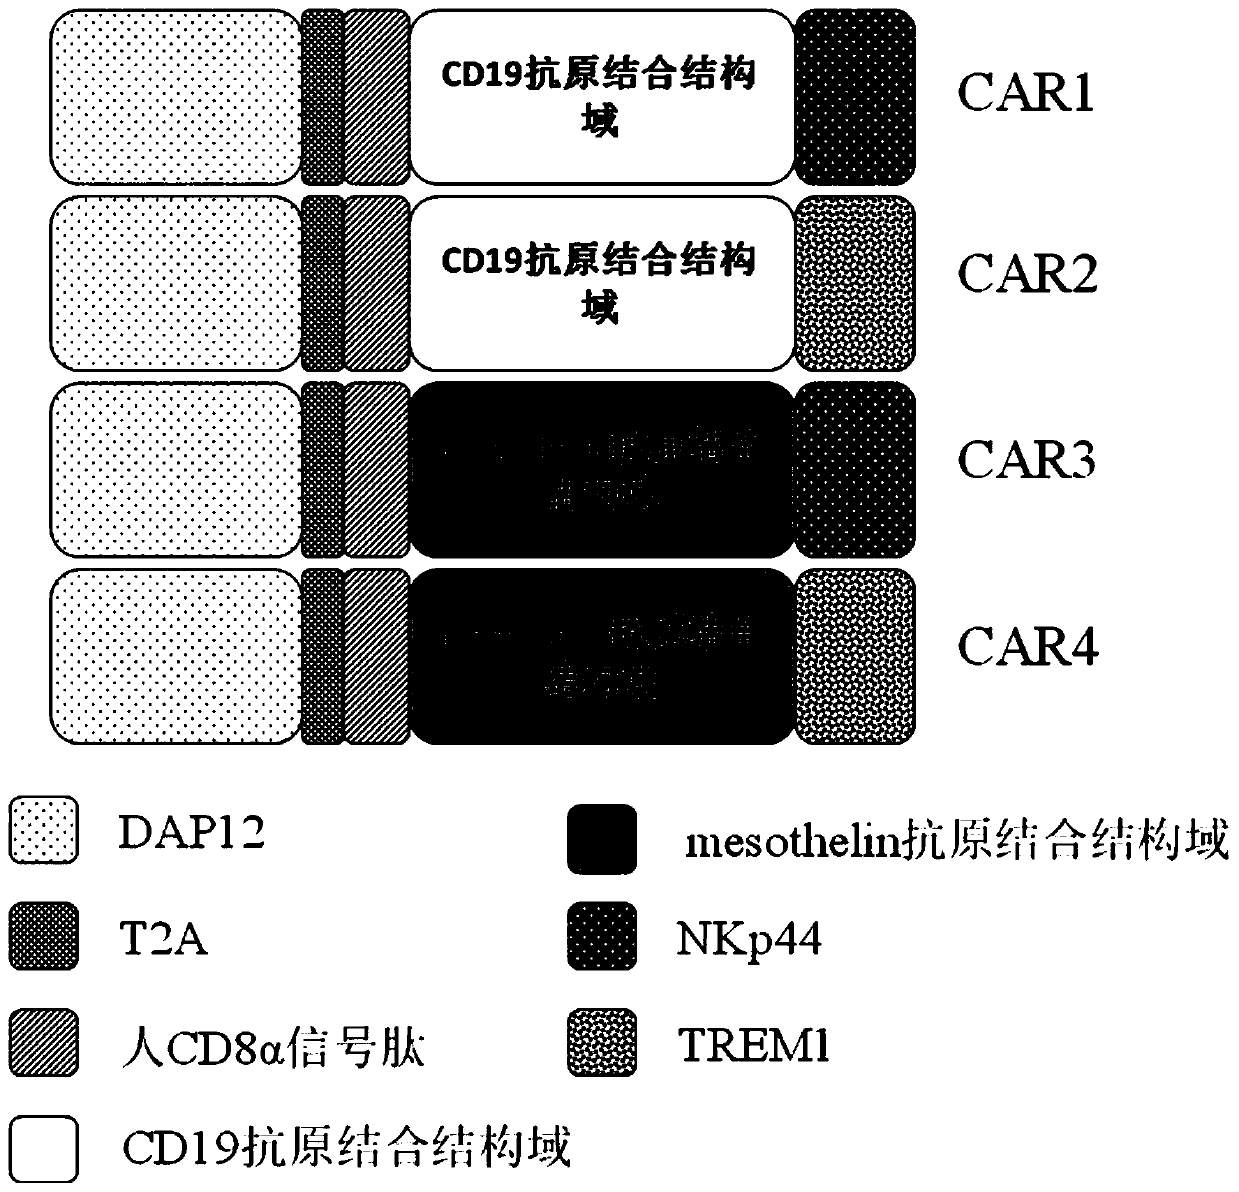 Use of Novel Chimeric Antigen Receptor Modified T Cells for Cancer Therapy